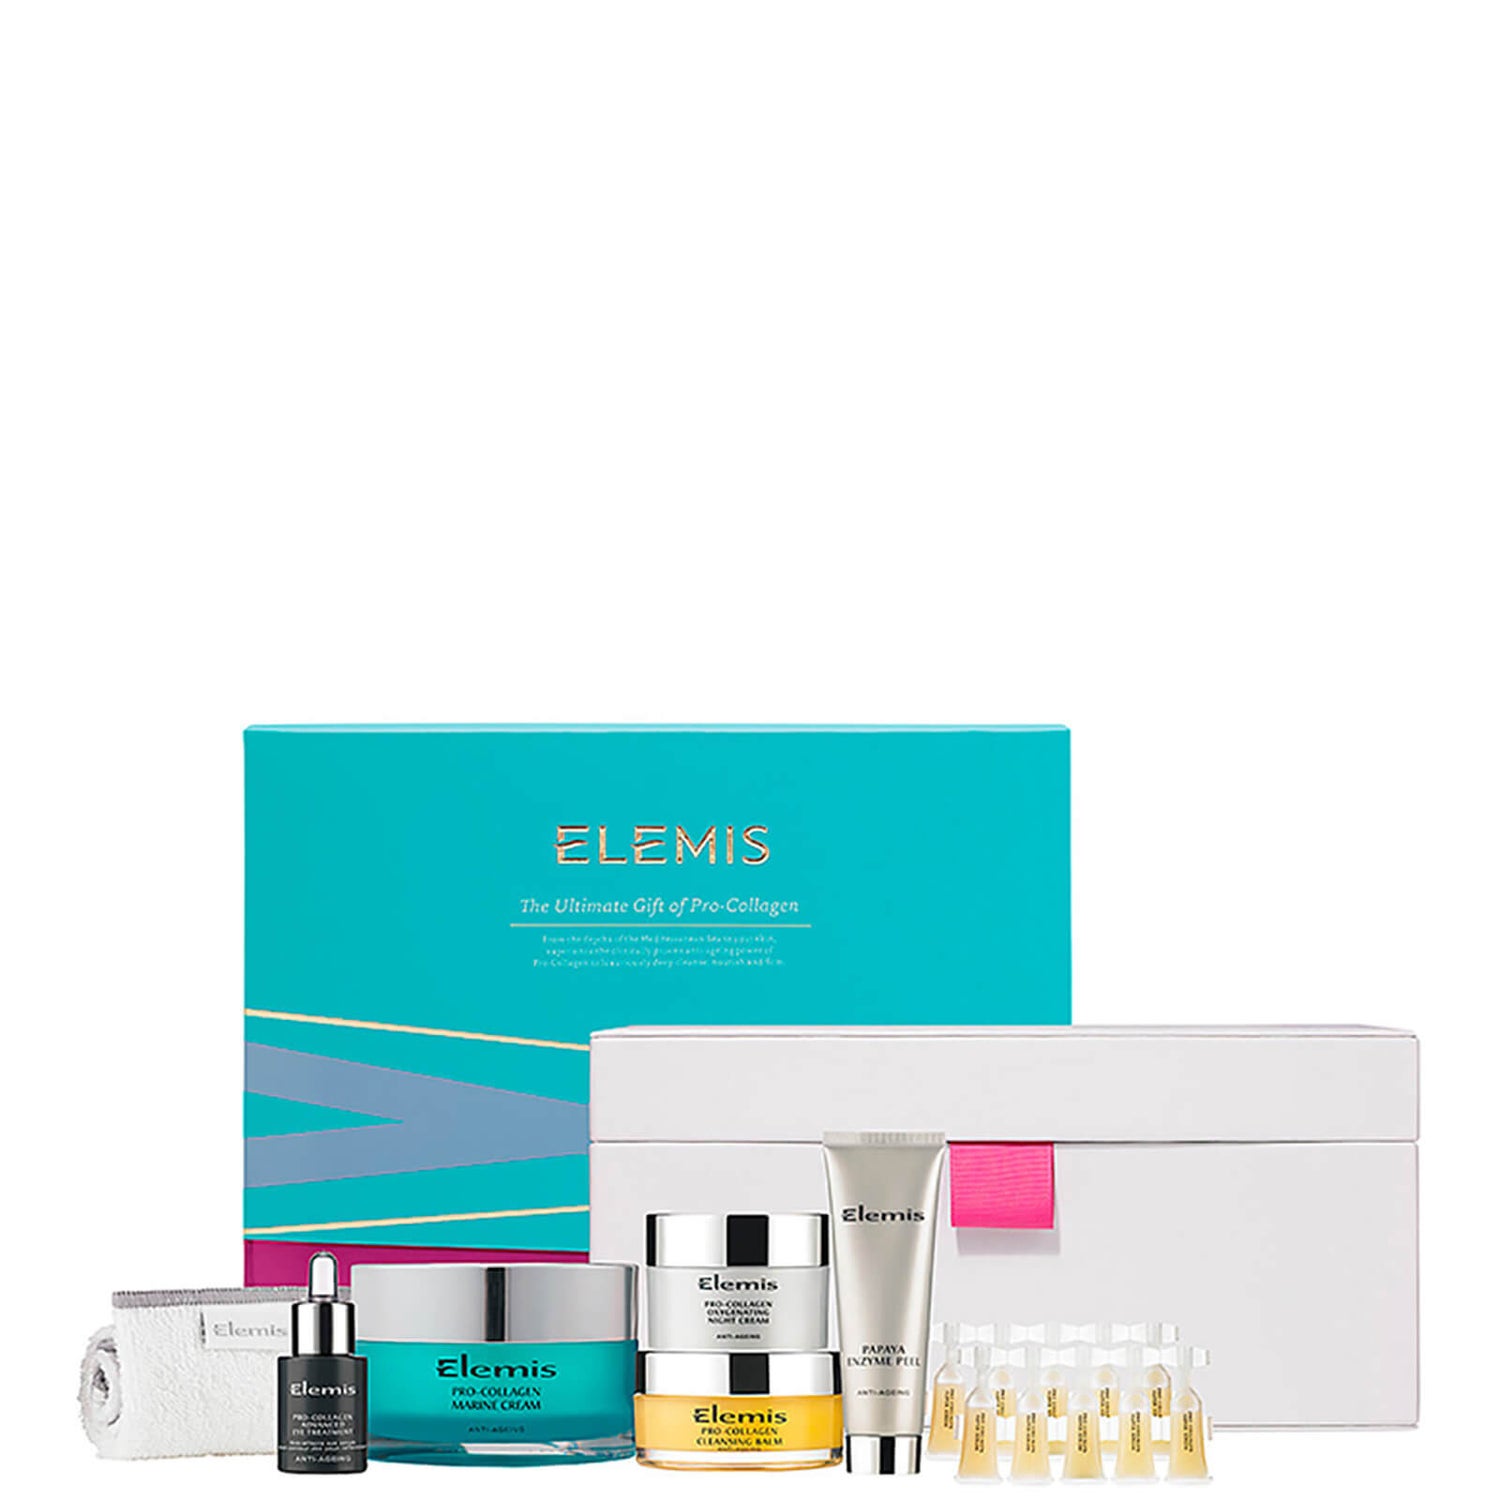 Elemis The Ultimate Gift Of Pro-Collagen collection